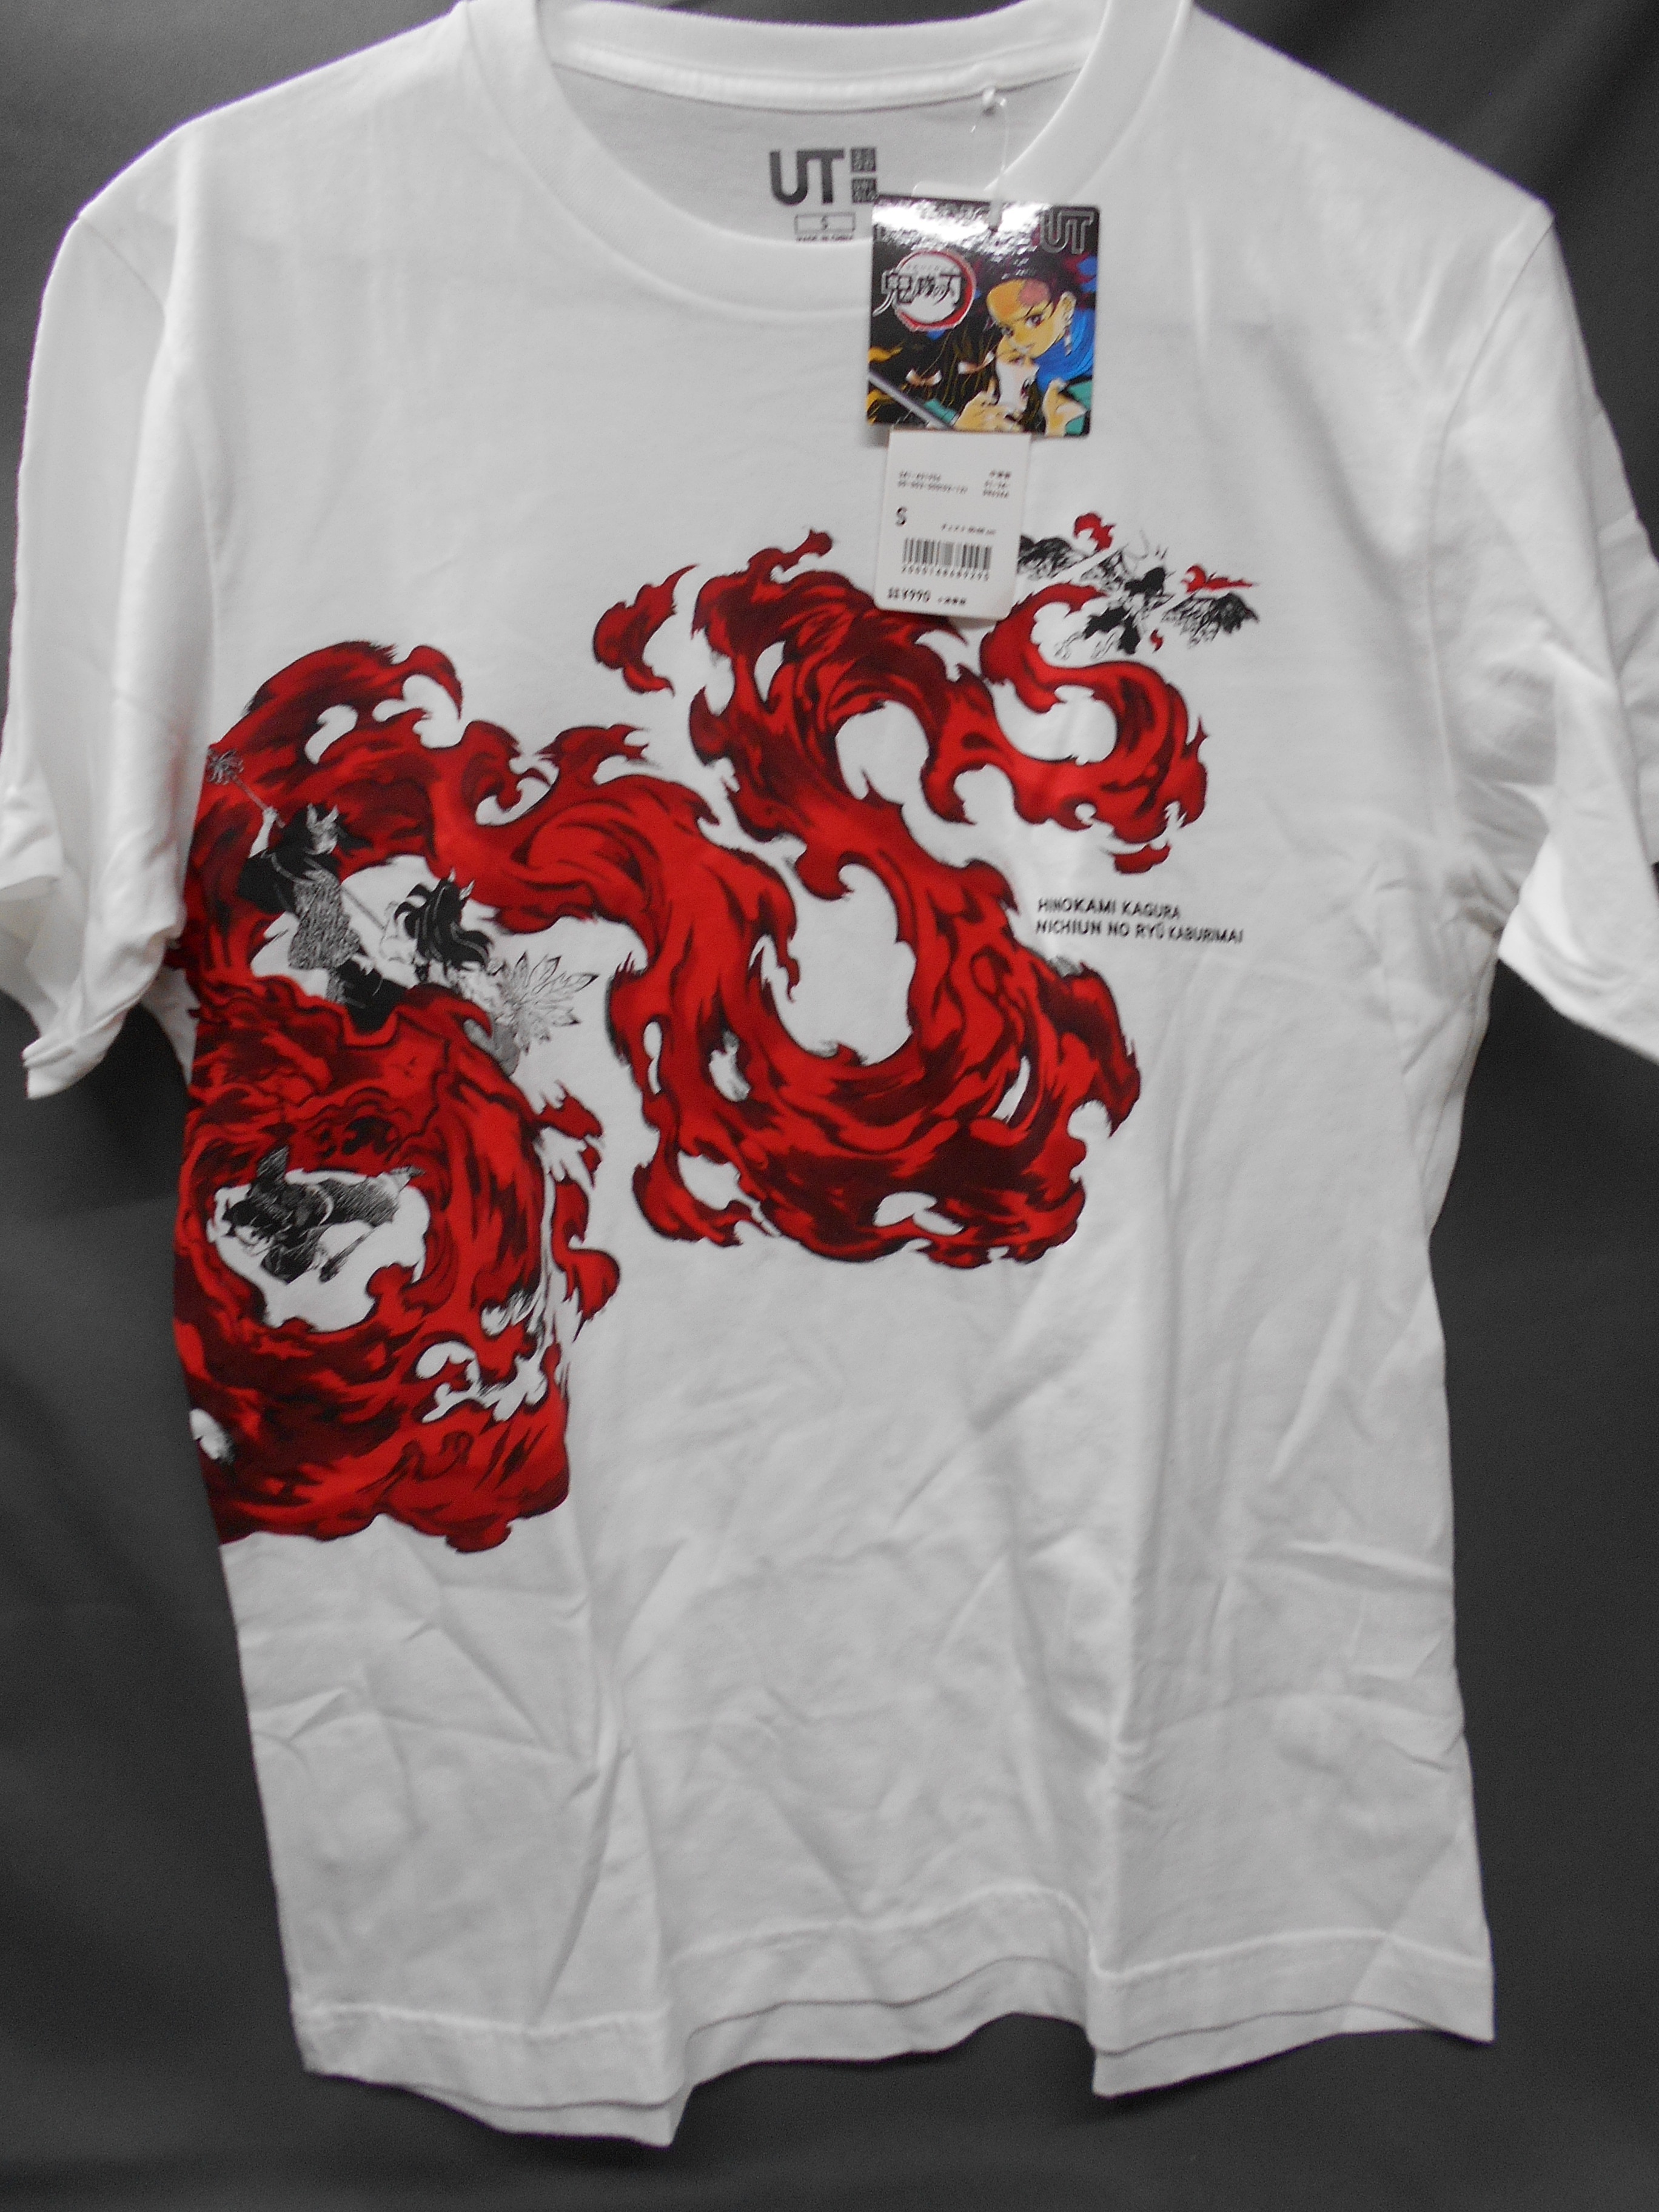 Uniqlo Japan to release Demon Slayer Tshirts for S1290  MothershipSG   News from Singapore Asia and around the world